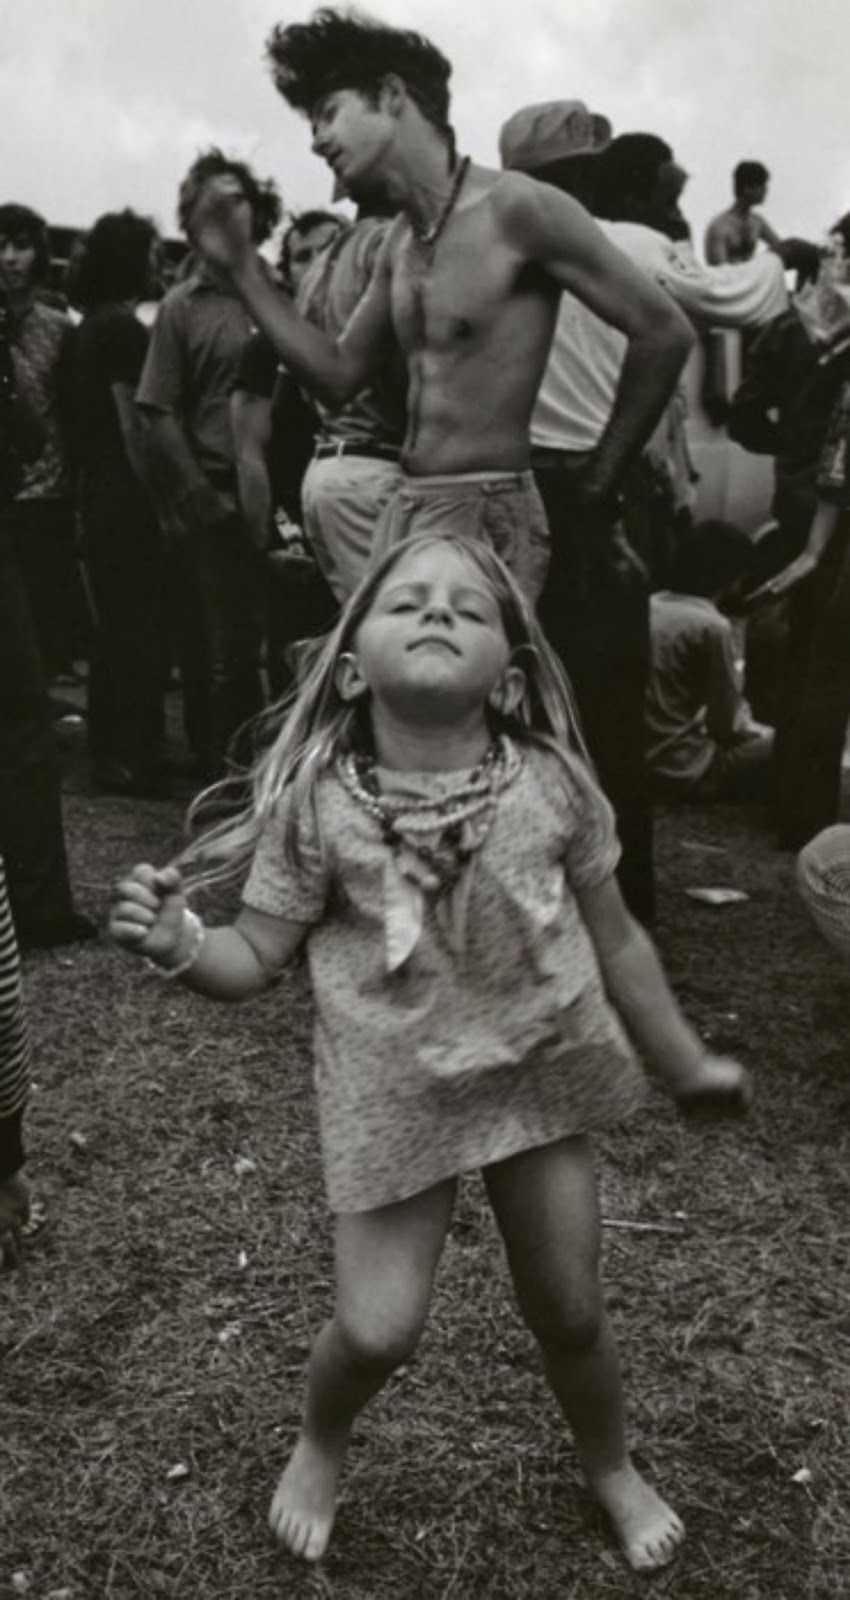 ... Hippie Girl Dancing at a Festival in New Orleans, Louisiana, 1972